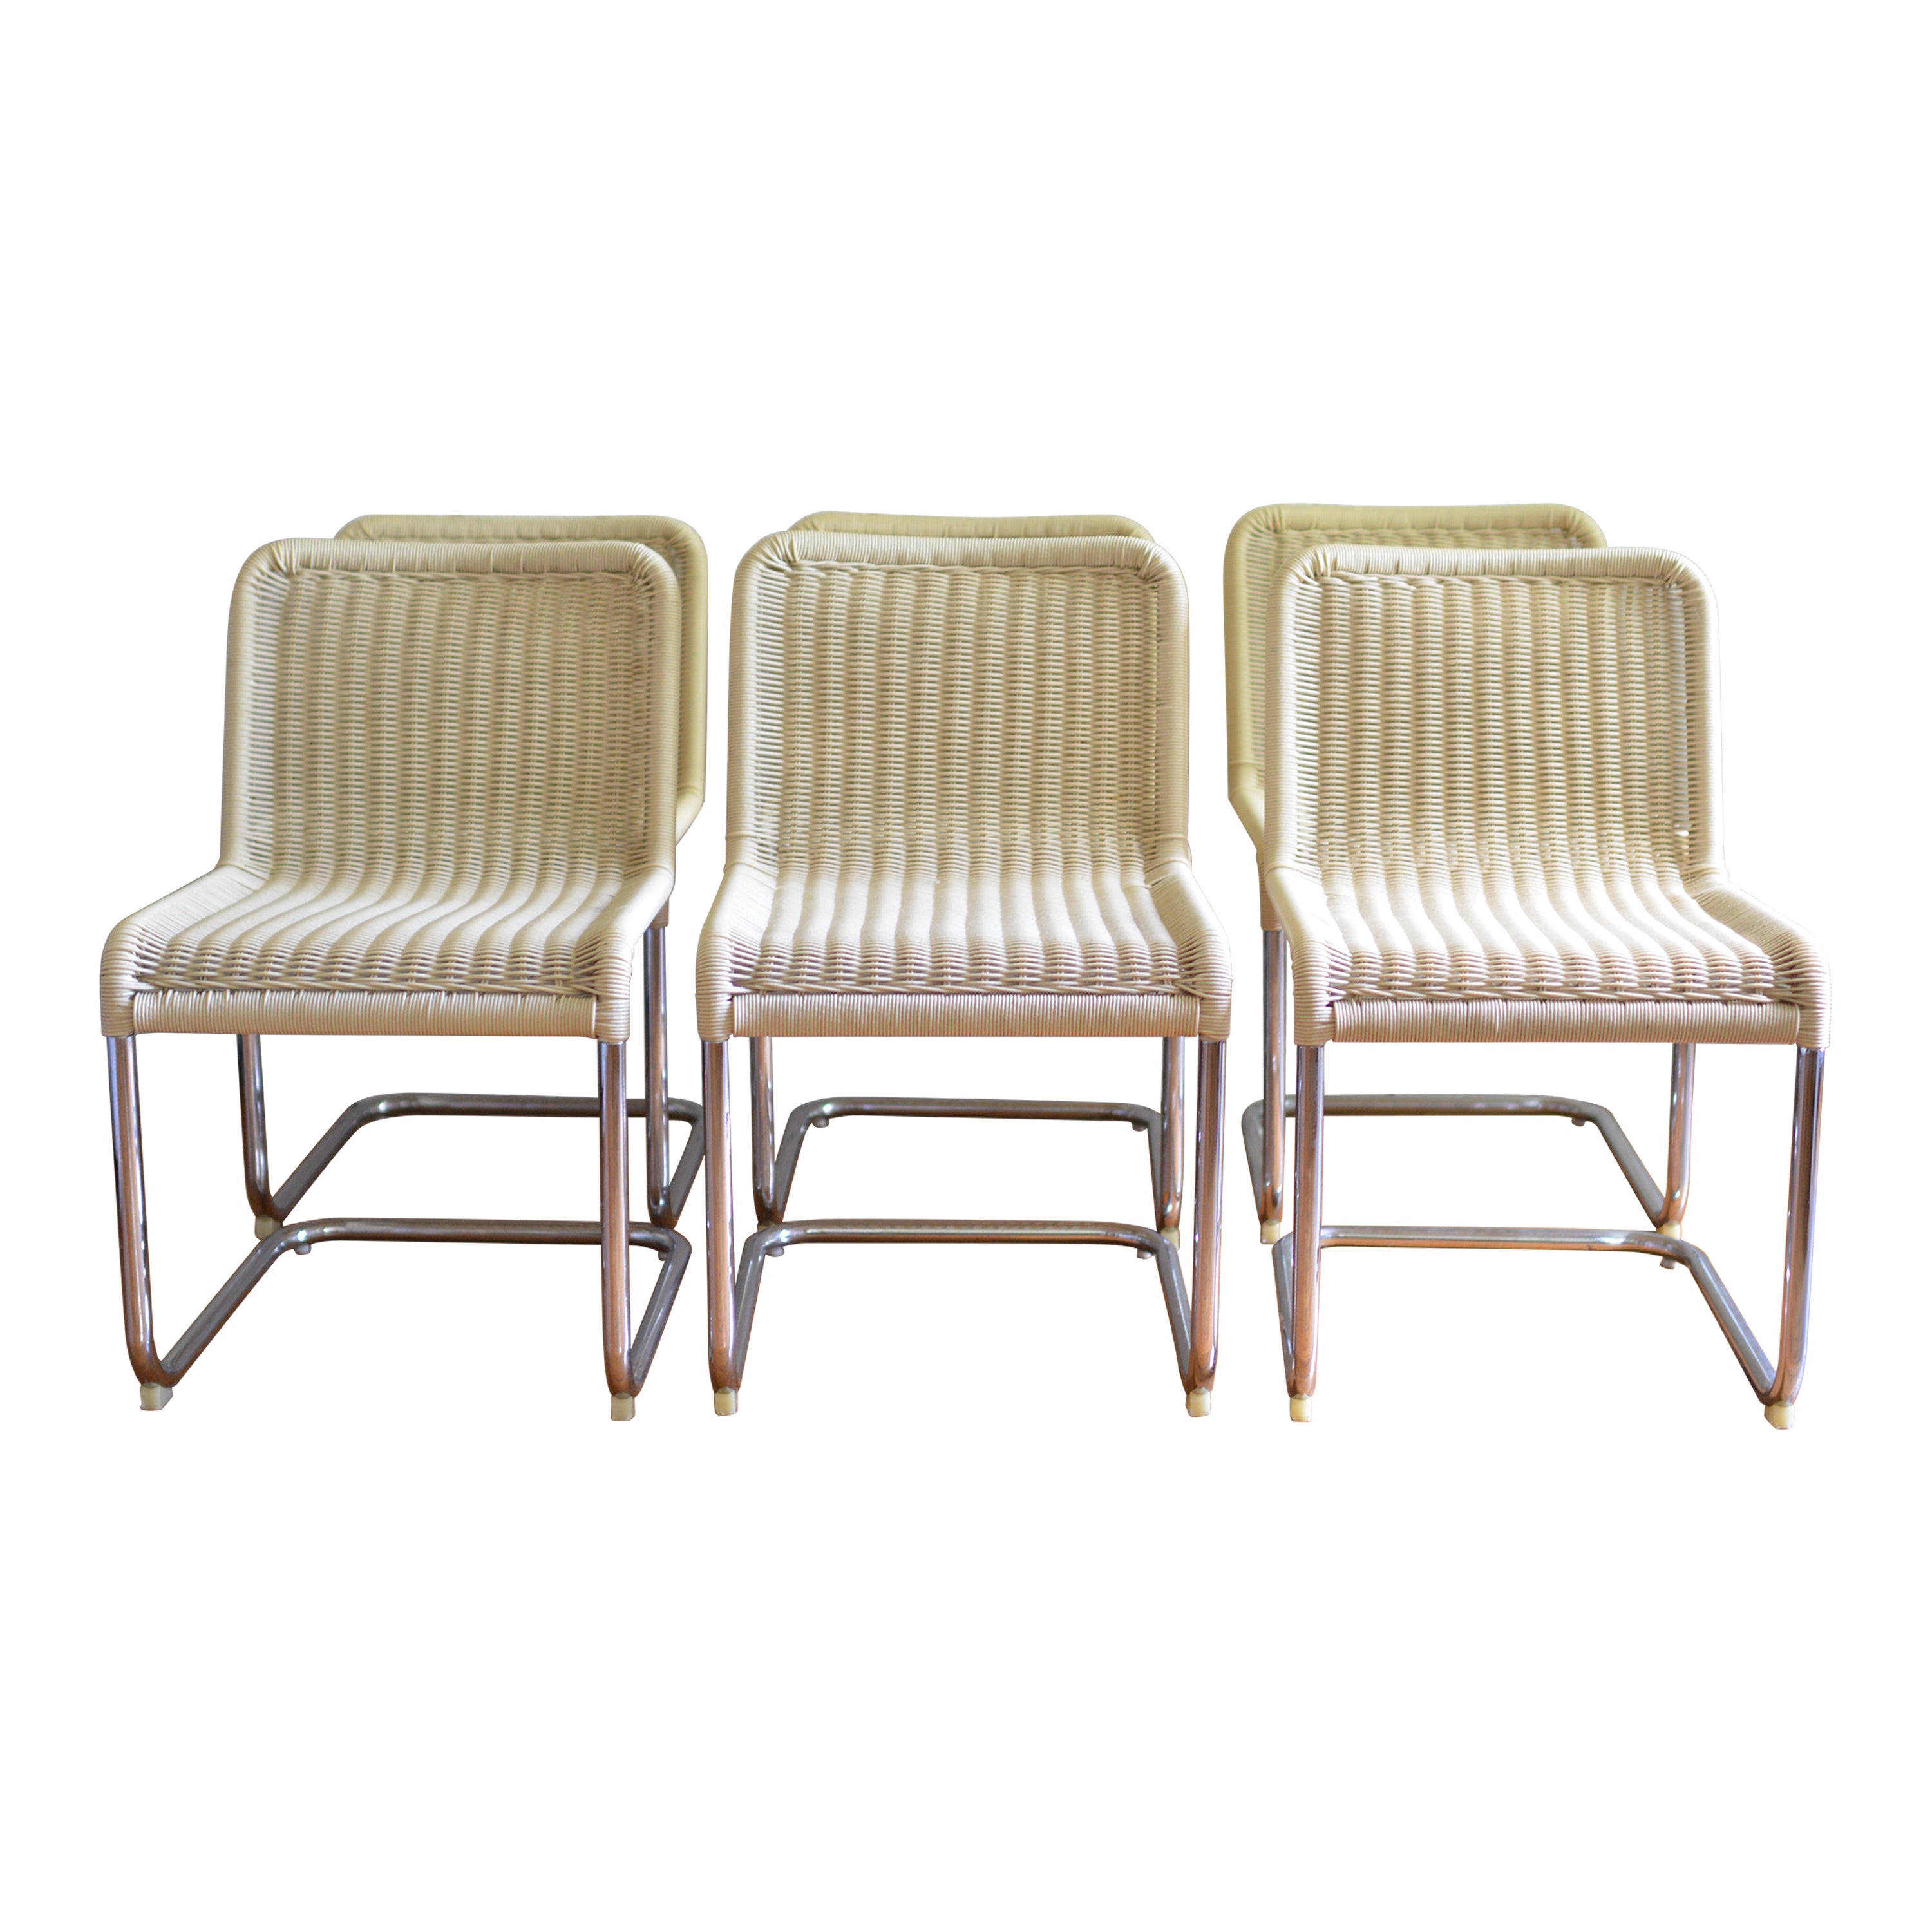 Mid-Century Modern Set of 6 Marcel Breuer Style Woven Acrylic Rattan and Chrome Chairs For Sale